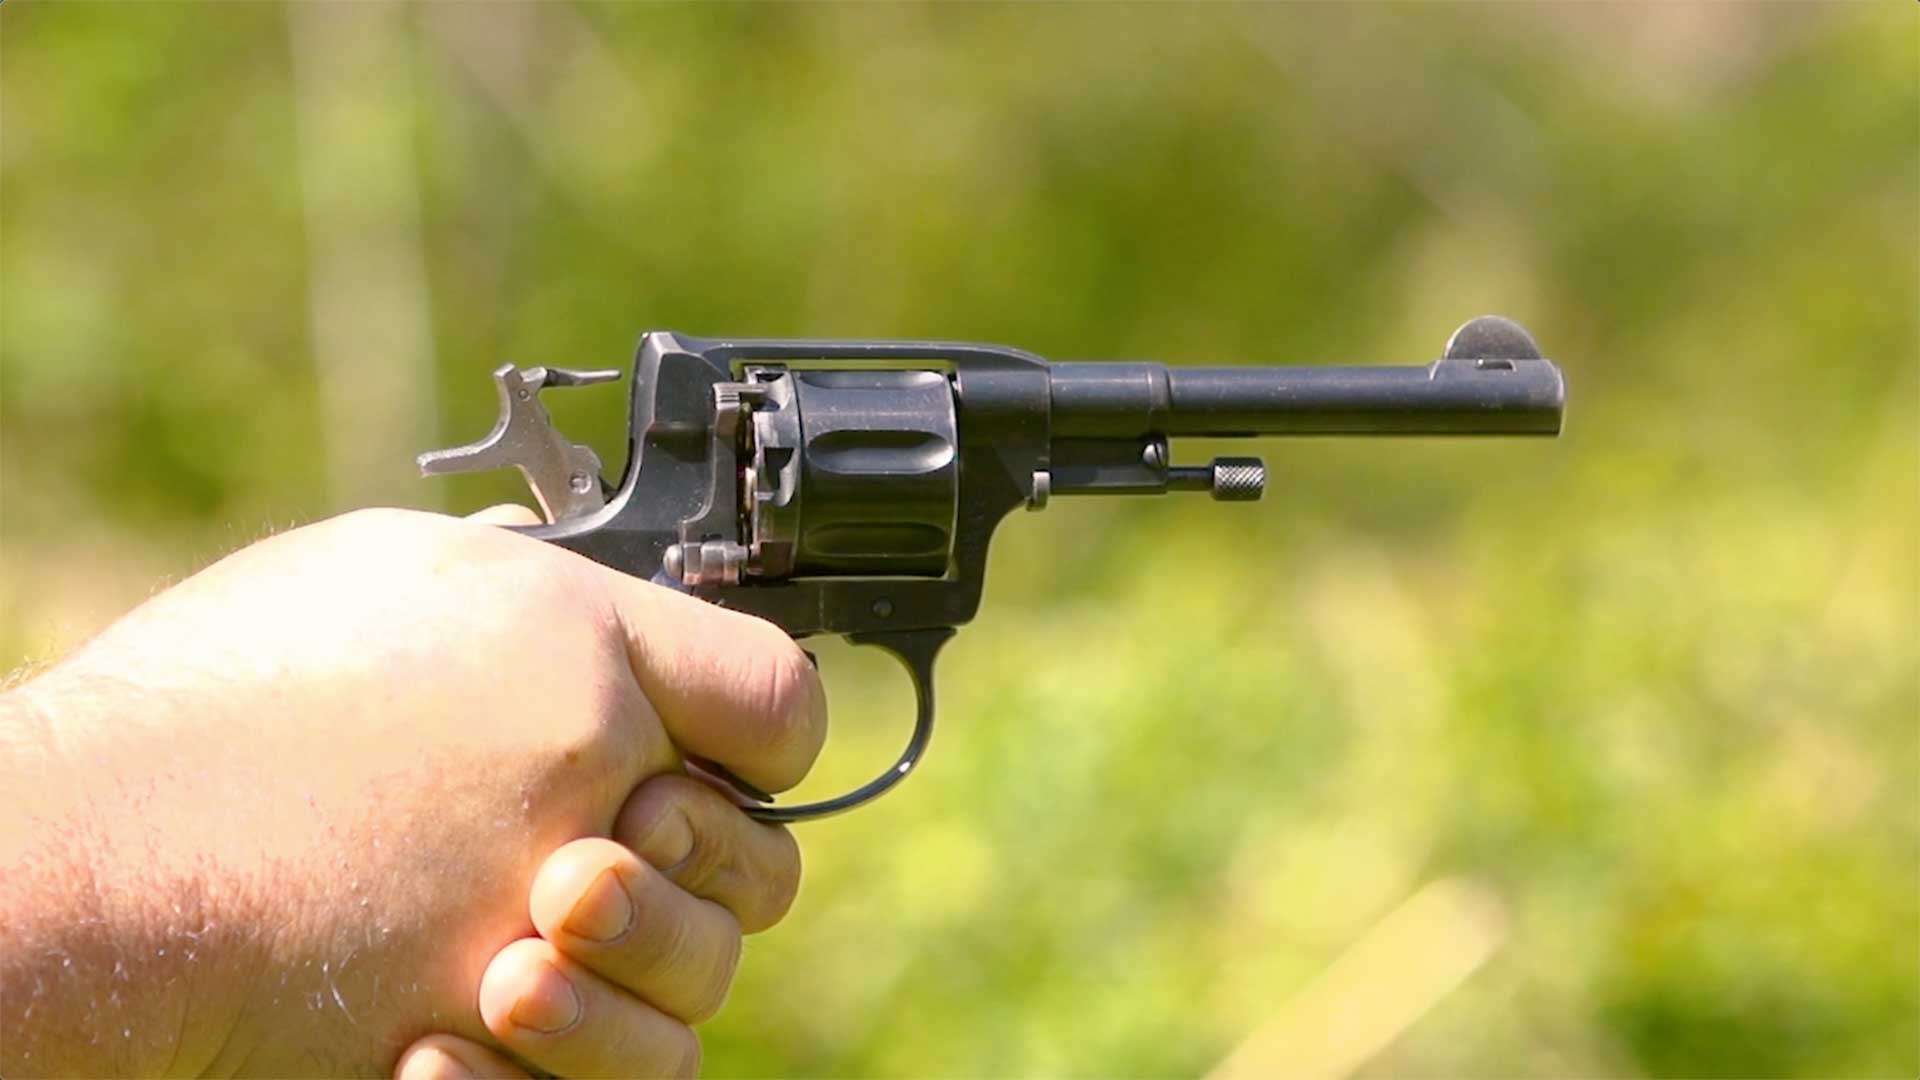 A pair of hands holding the M1895 Nagant revolver, aiming it on a green, outdoor range.